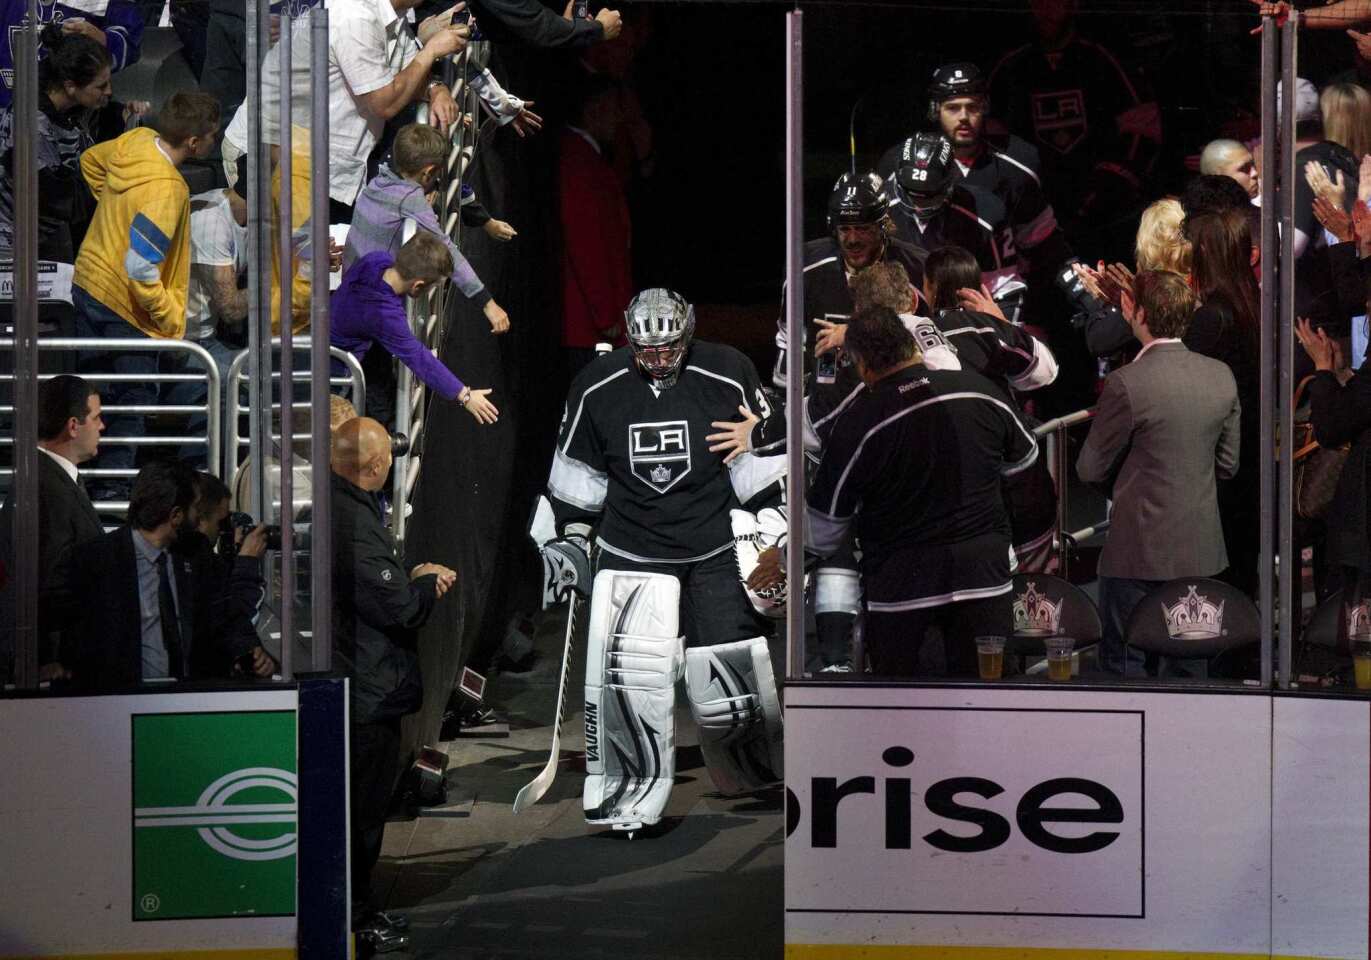 Kings goalie Jonathan Quick heads out onto the ice before the start of Tuesday's playoff game against the Phoenix Coyotes.